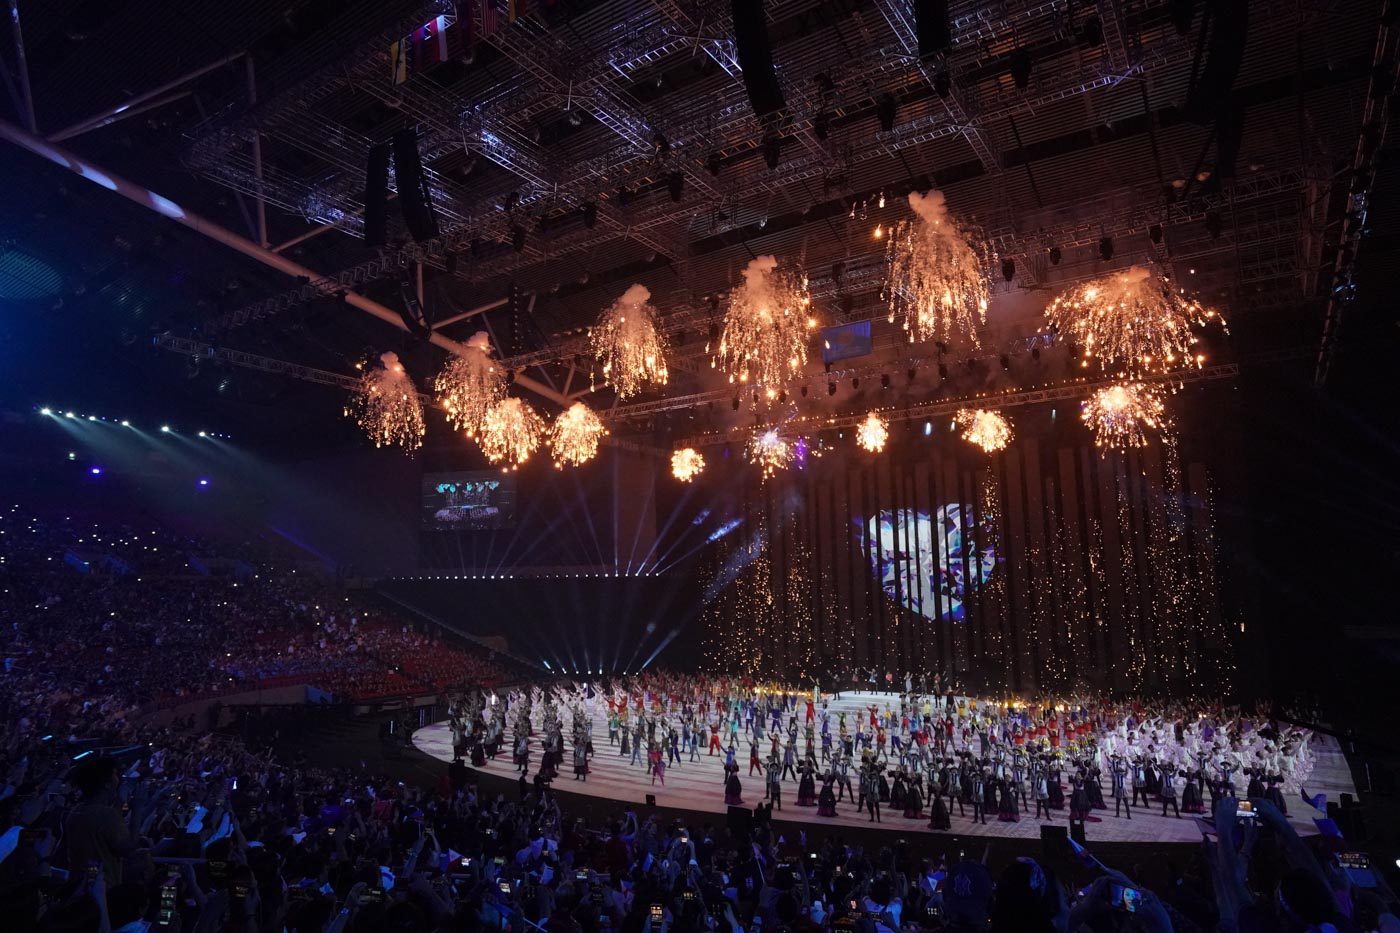 FULL LIST: Performers at the SEA Games 2019 opening